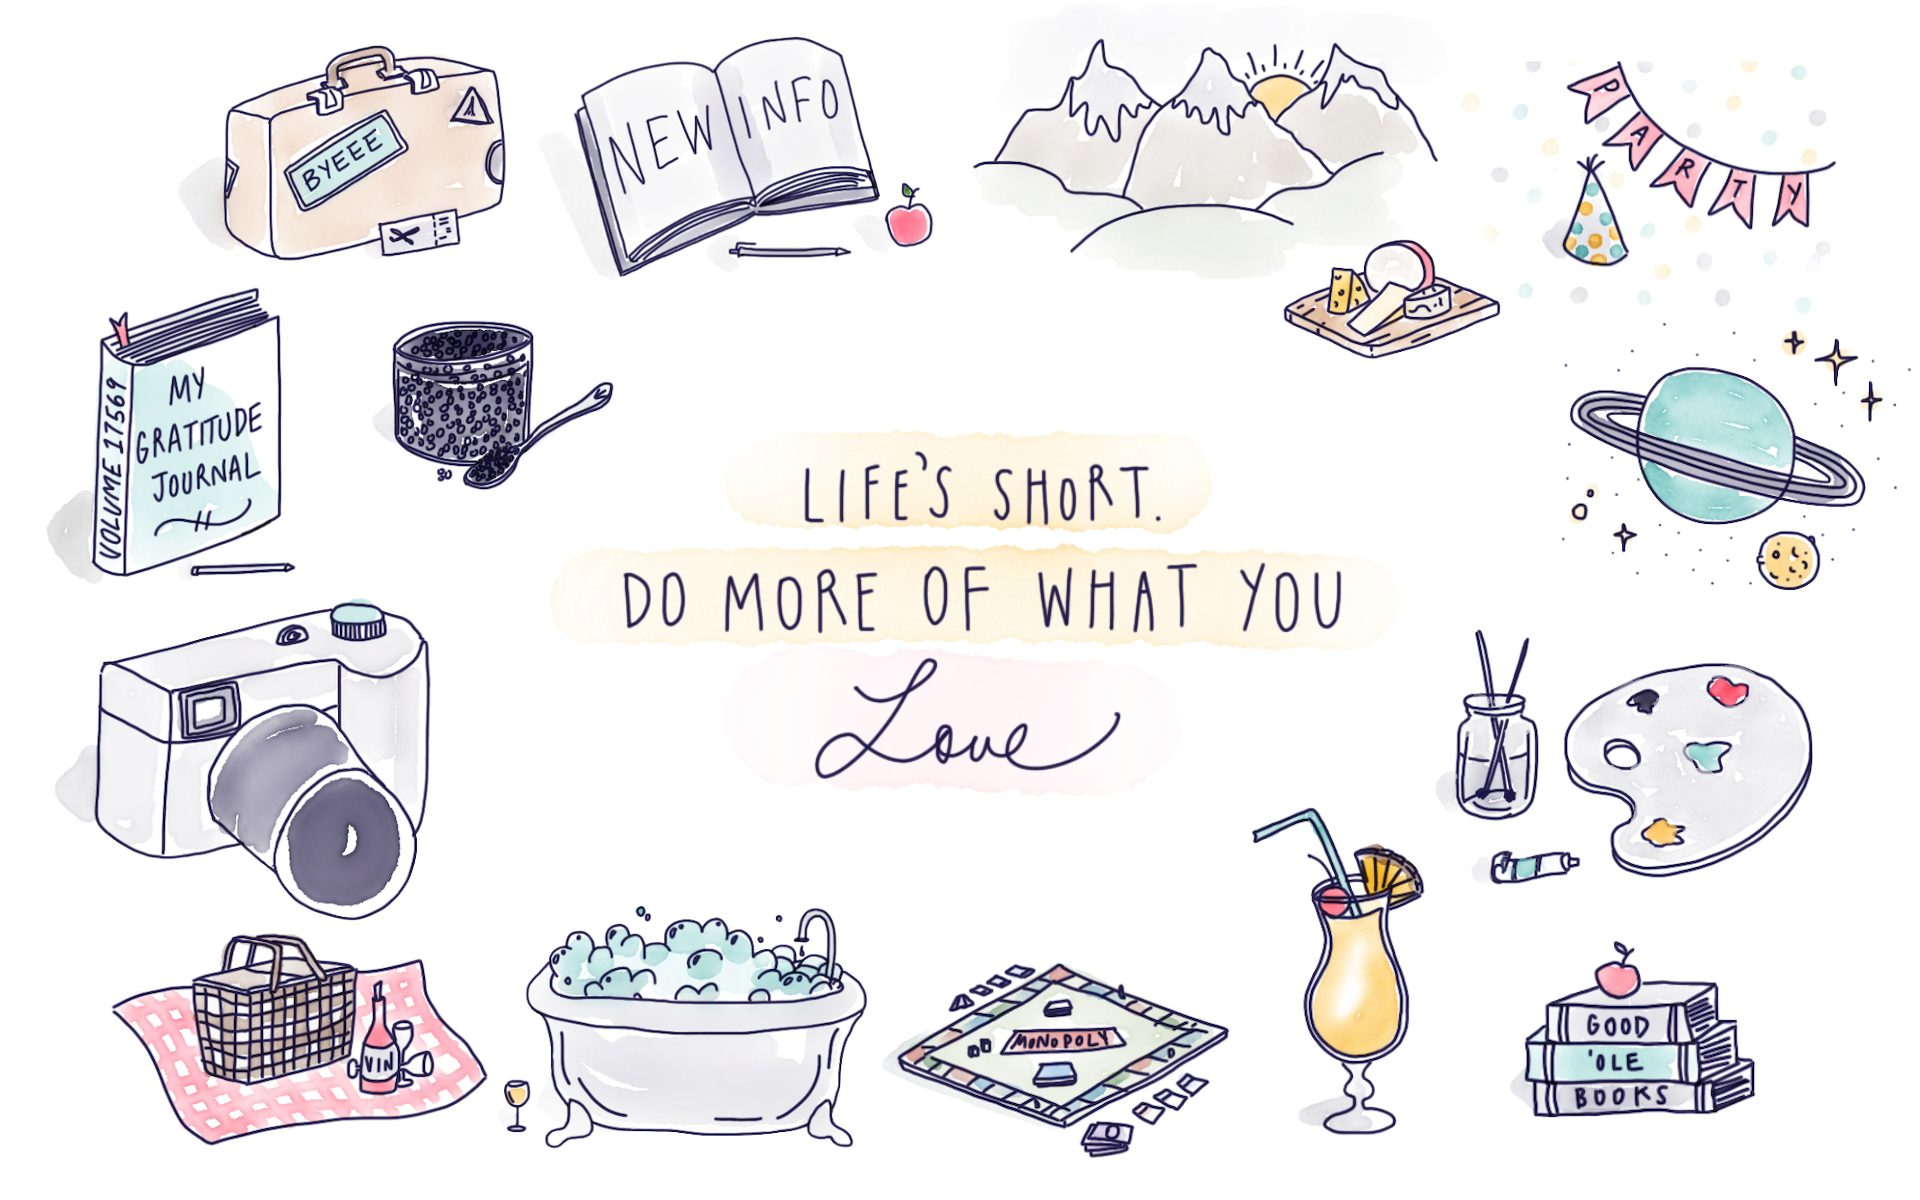 Life’s Short—Do More of What You Love